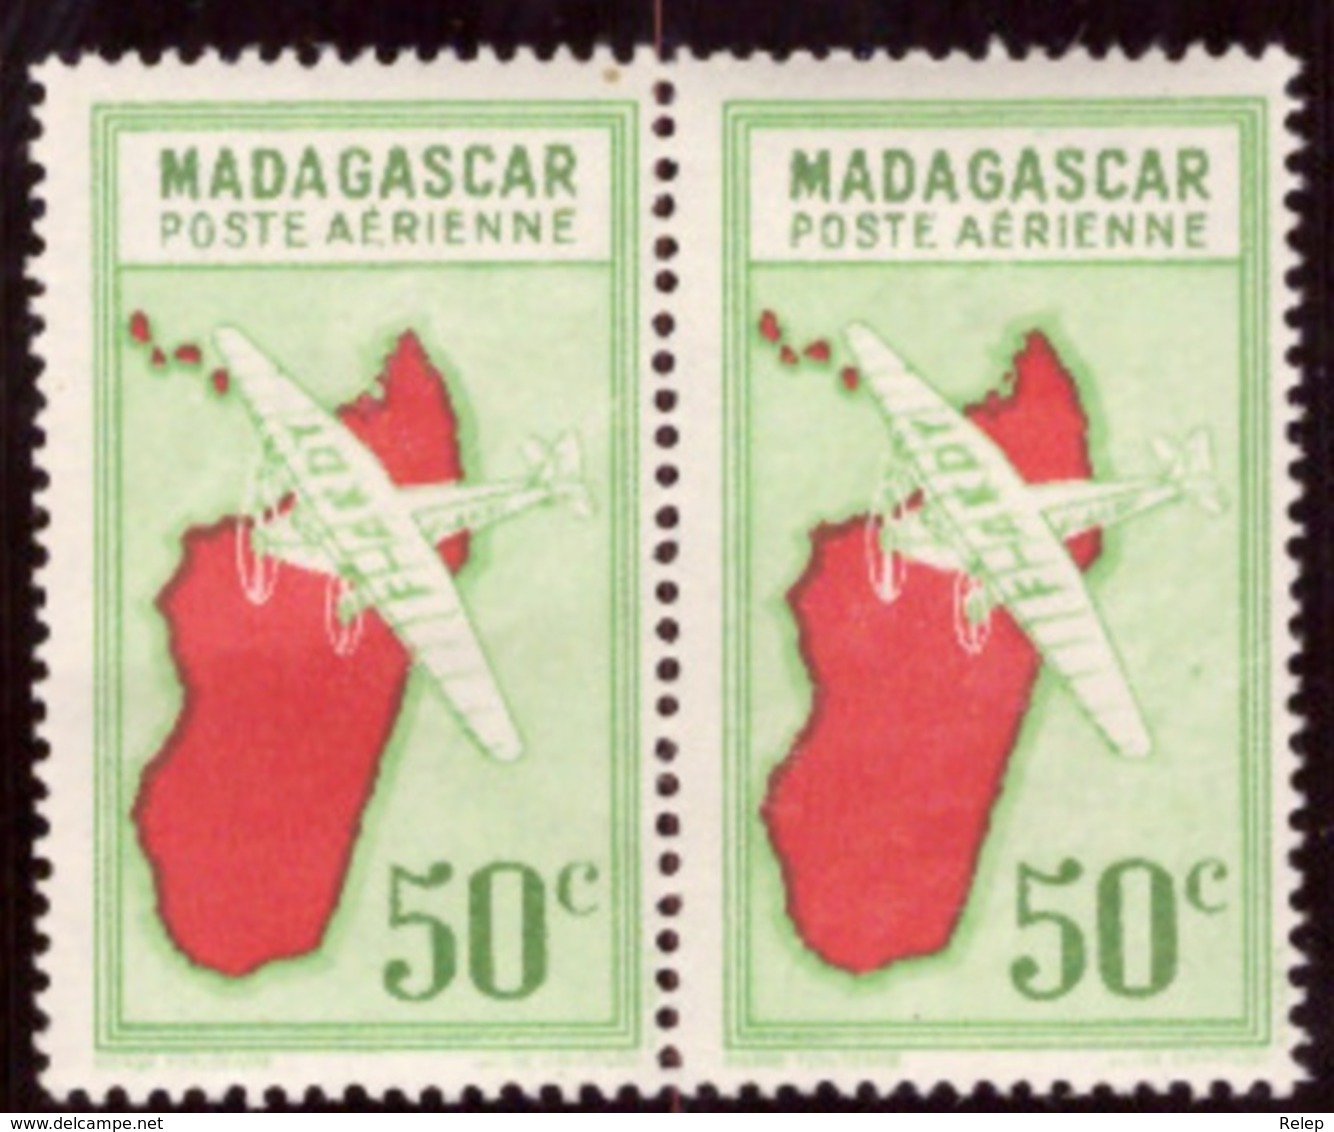 Madagascar - 1942 Airmail - Airplane Over Map Of Madagascar Without "RF" Top Left # MINT # Poste Aérienne 50C - Ongebruikt